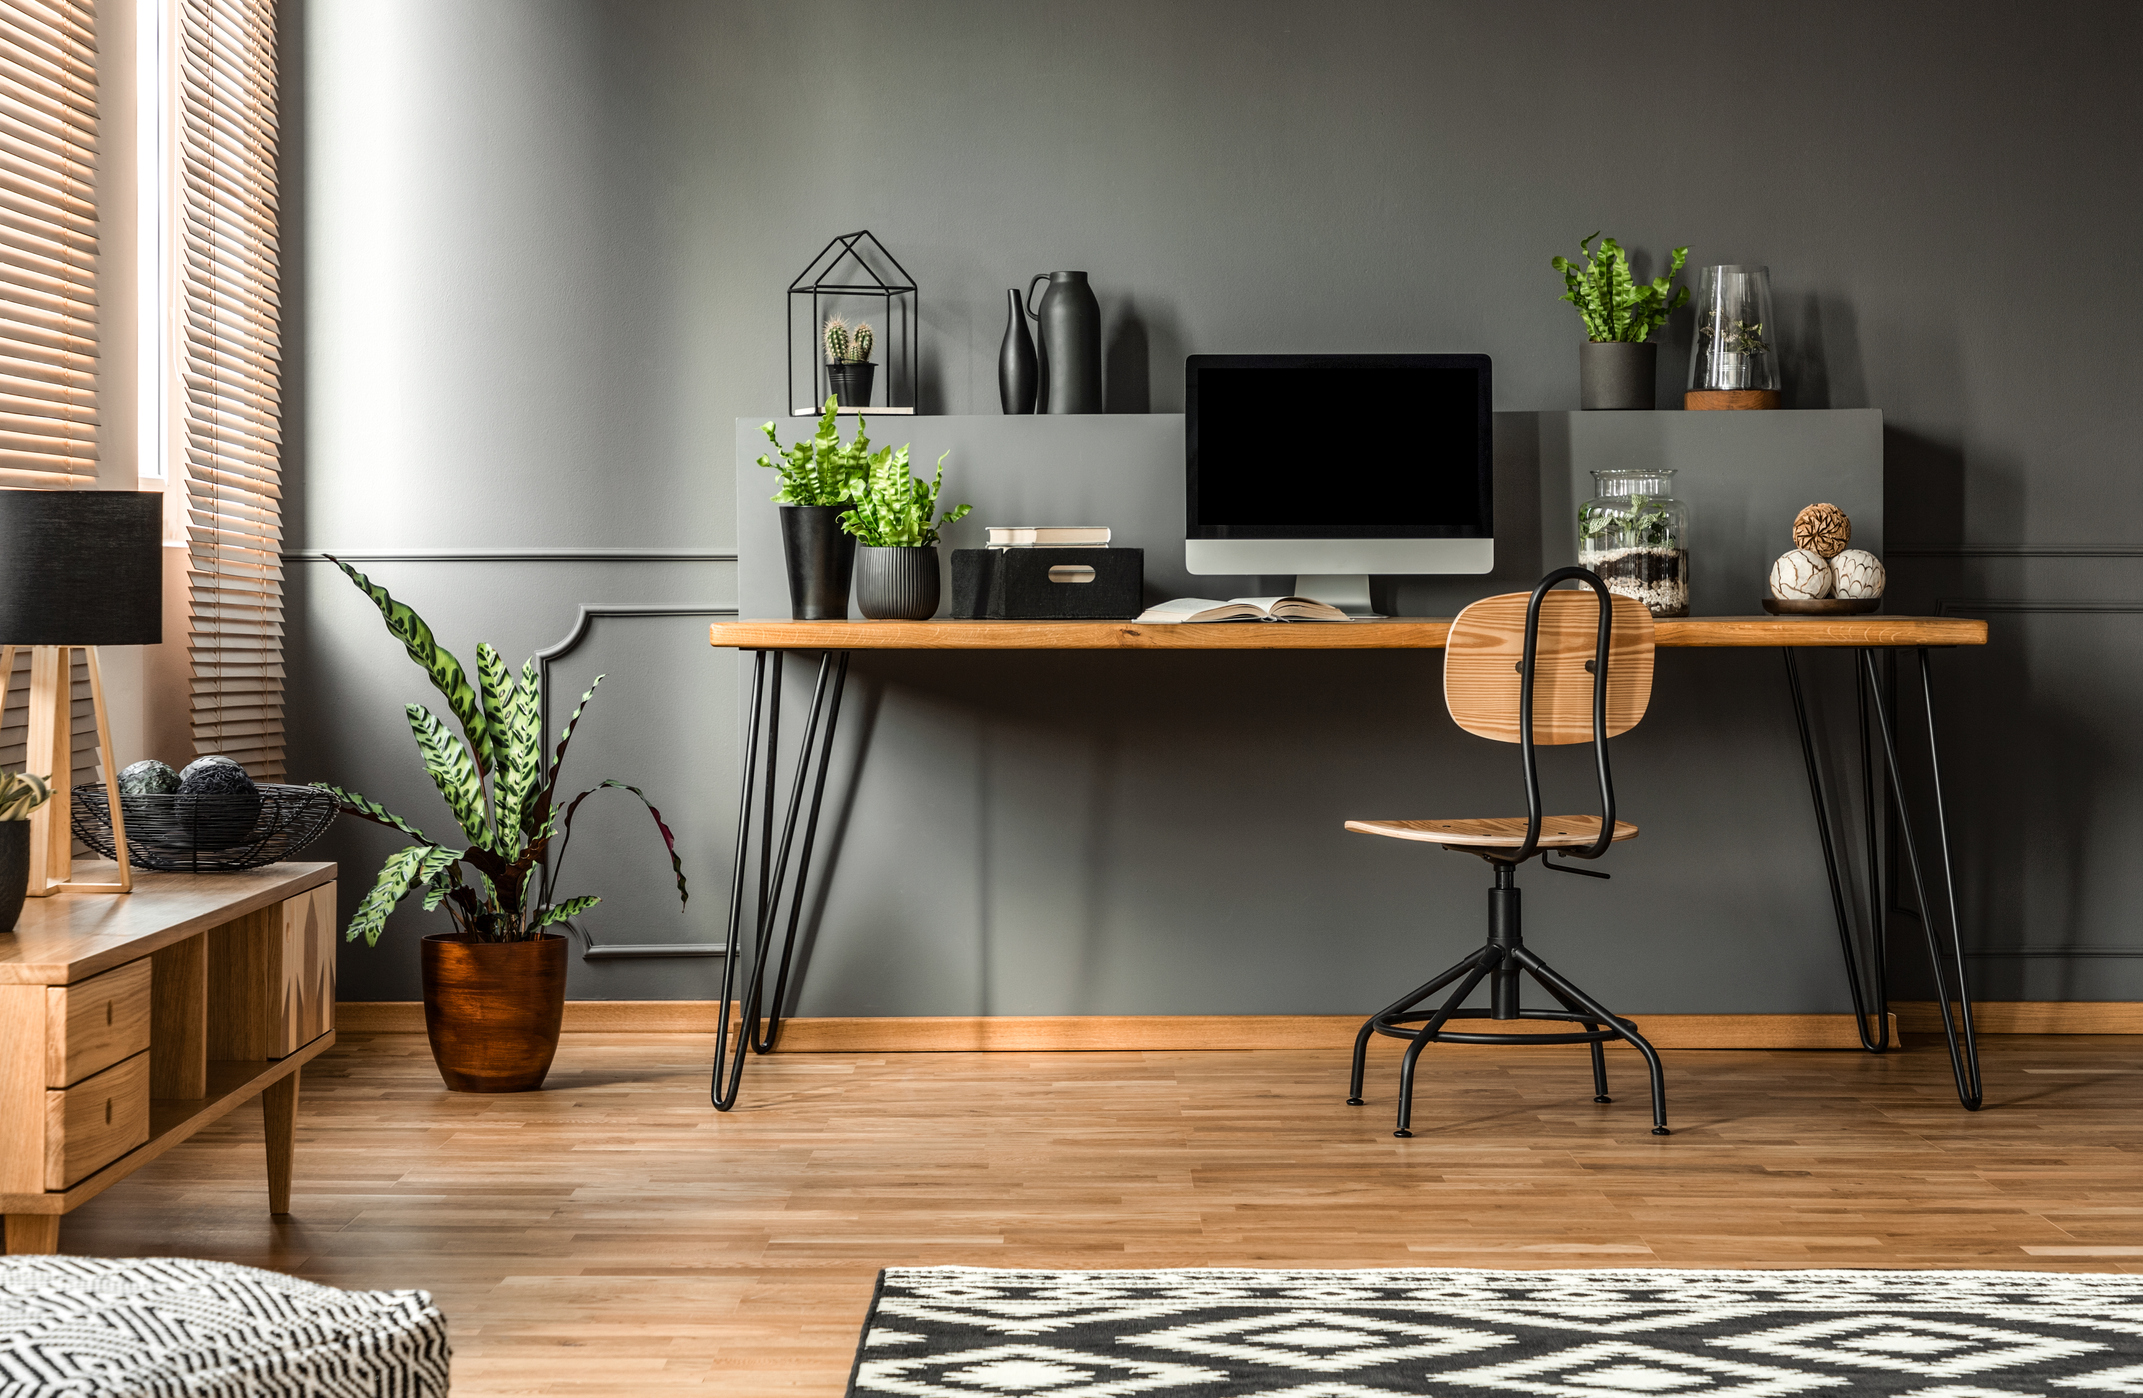 How to Create the Perfect Home Workstation or Office - Singh Homes